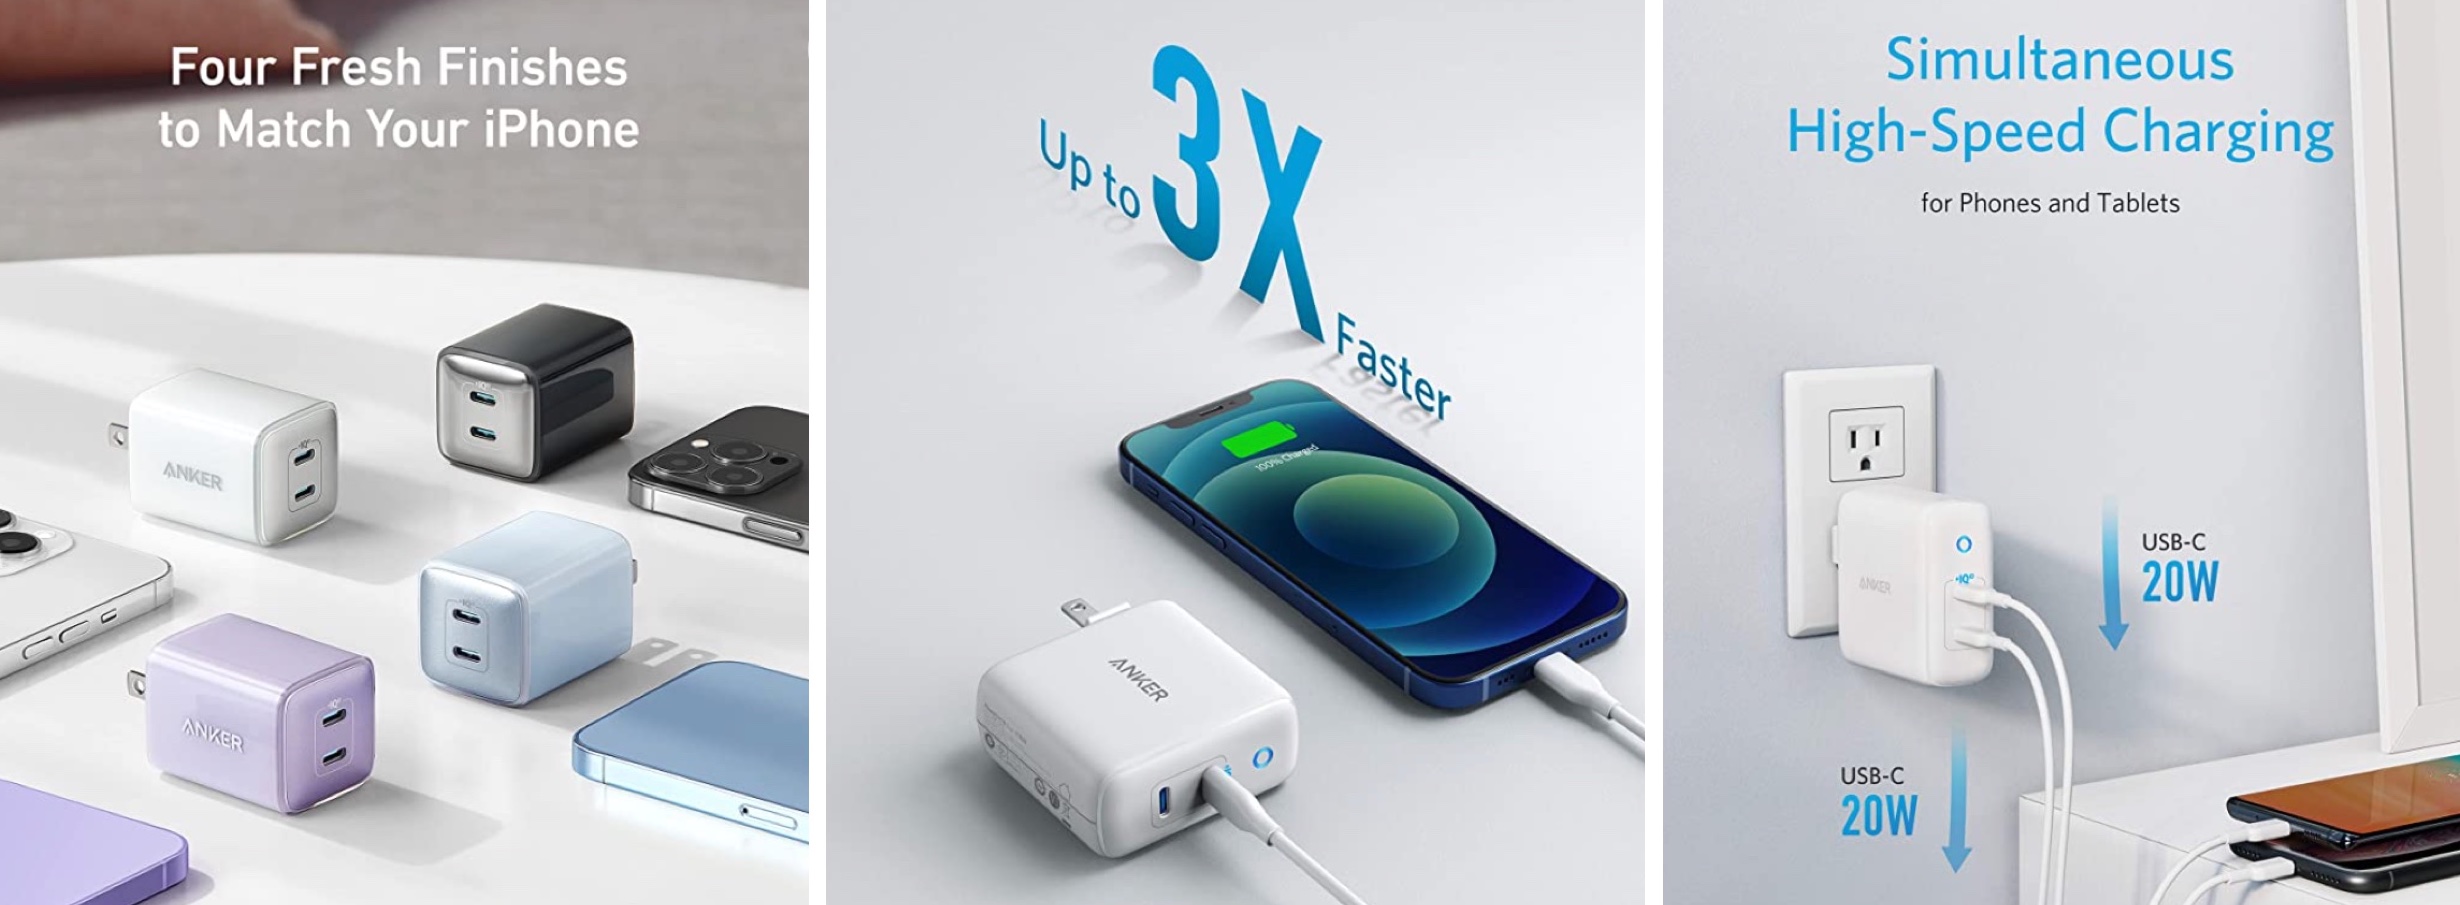 Deals: Anker Offers Cheaper Dual USB-C Charger Alternatives on Amazon, Available From $27.99